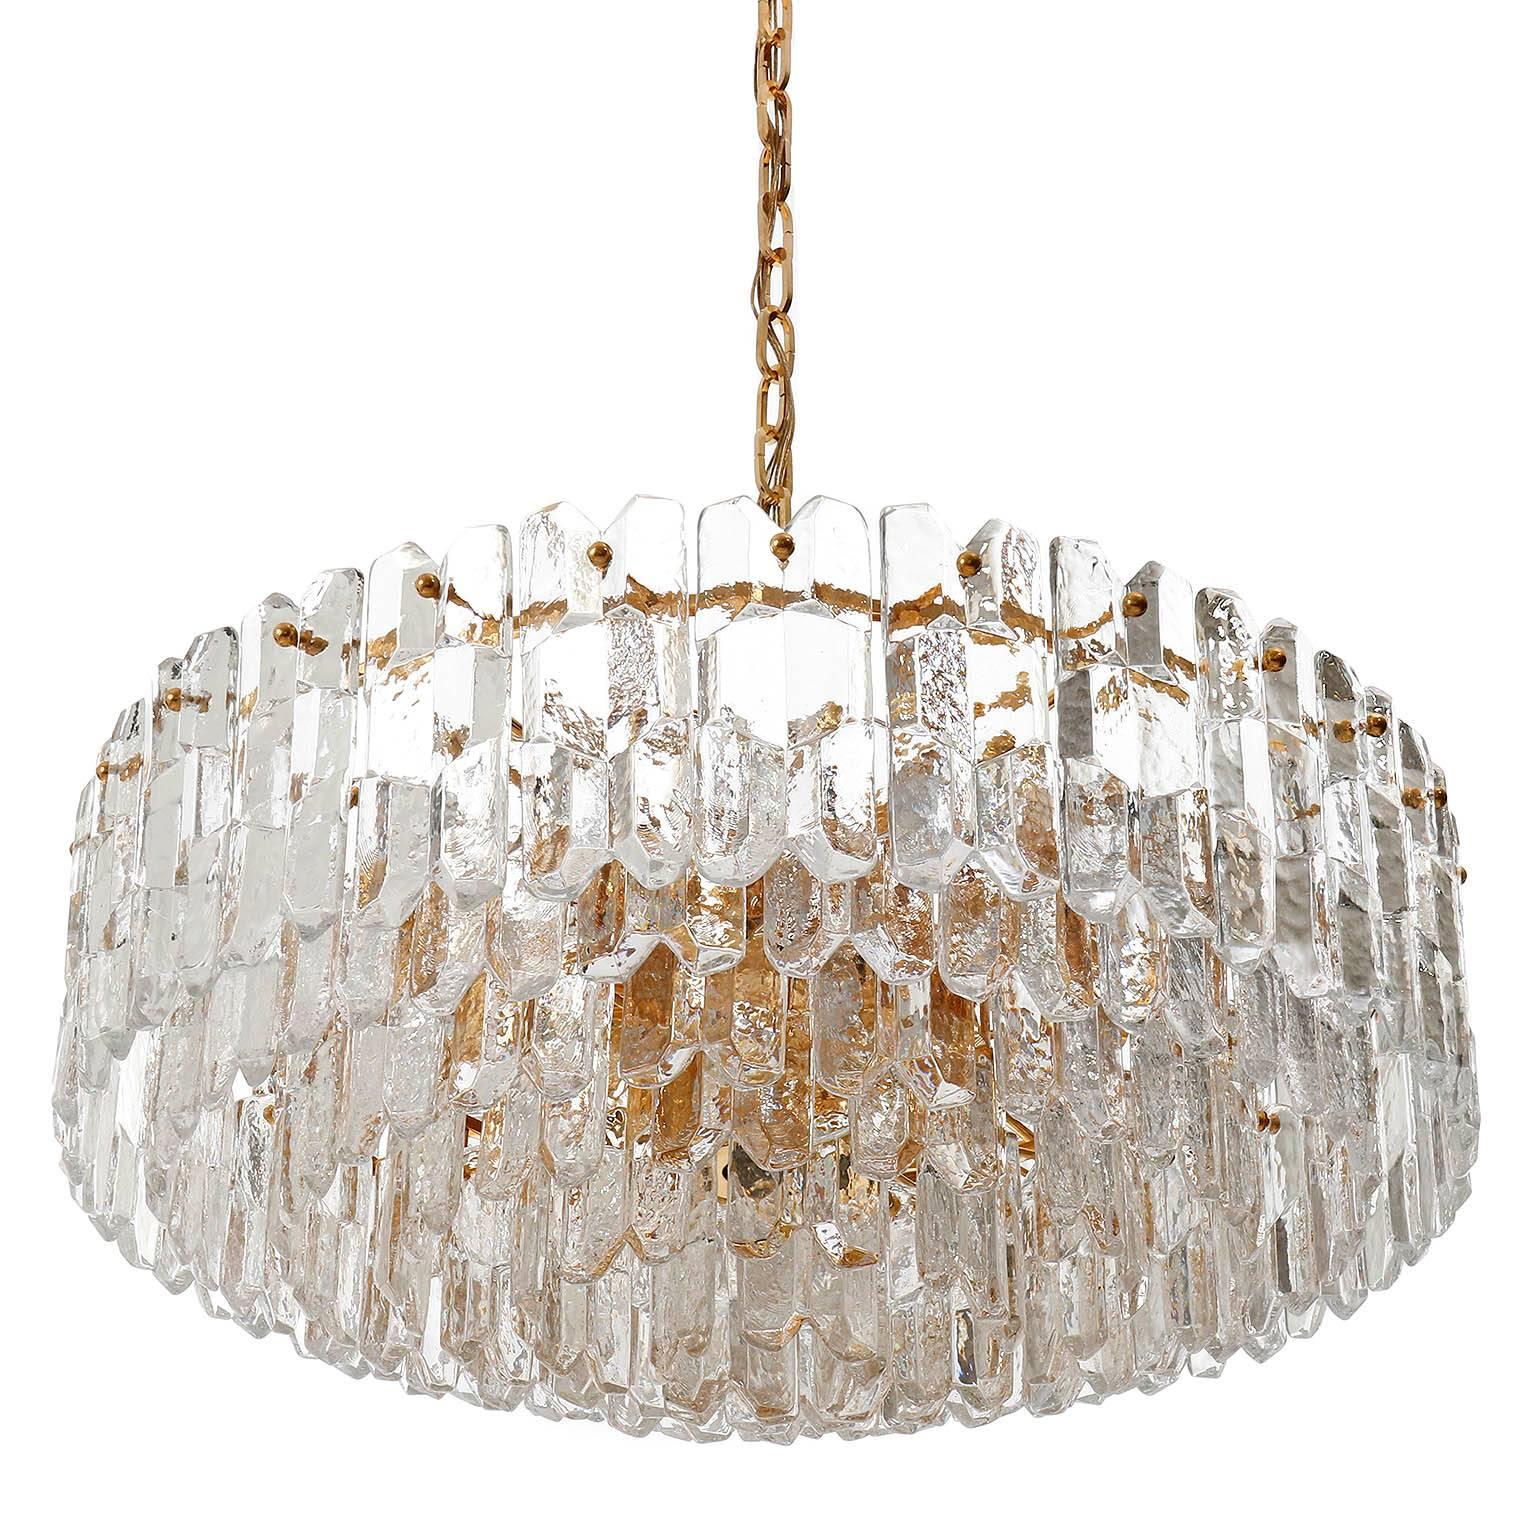 A large and very exquisite 24-carat gold-plated brass and clear brilliant glass 'Palazzo' chandeliers by J.T. Kalmar, Vienna, Austria, manufactured in circa 1970 (late 1960s and early 1970s).
Labeled and documented in the Kalmar catalogues from the